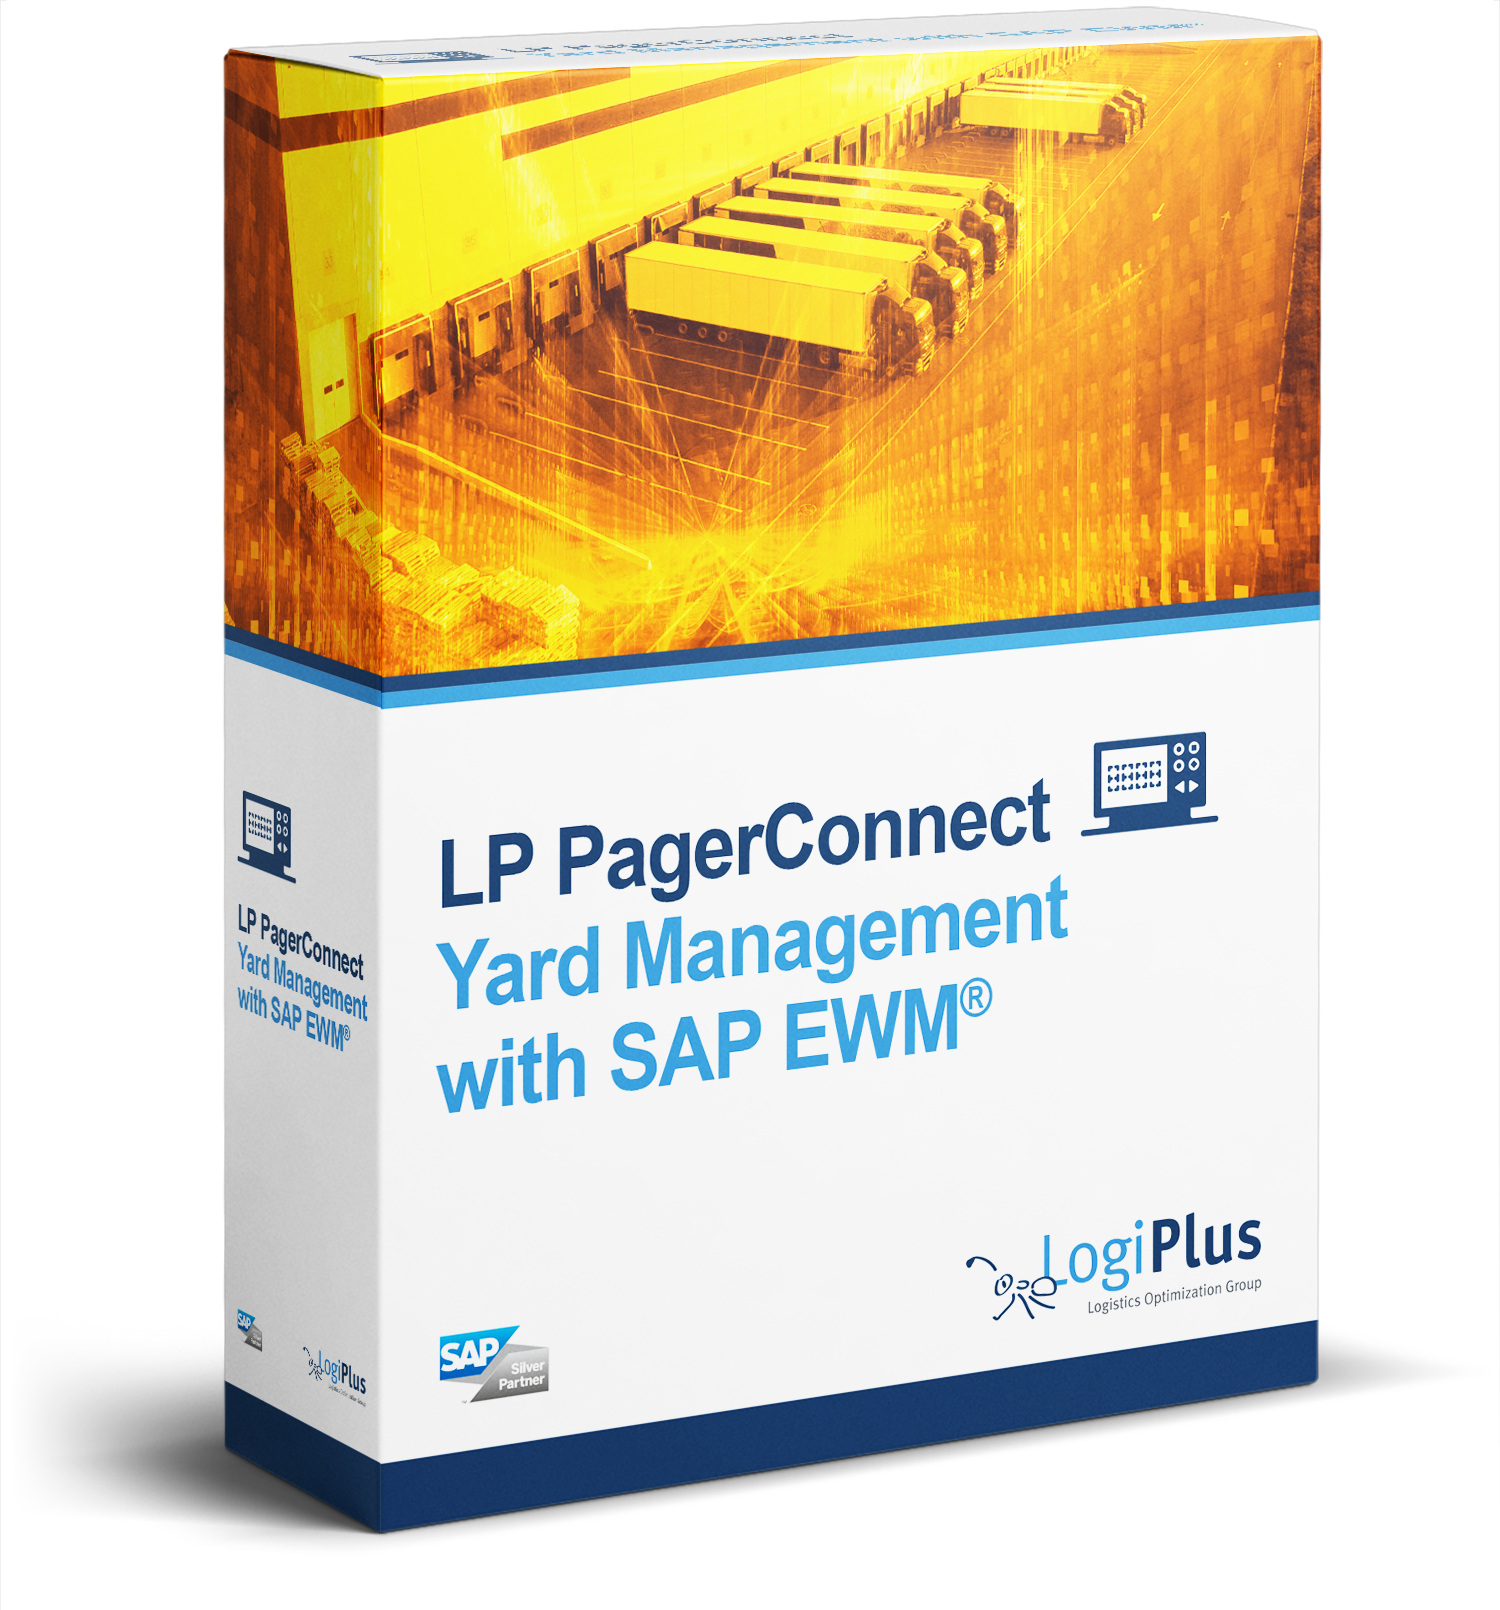 LP PagerConnect